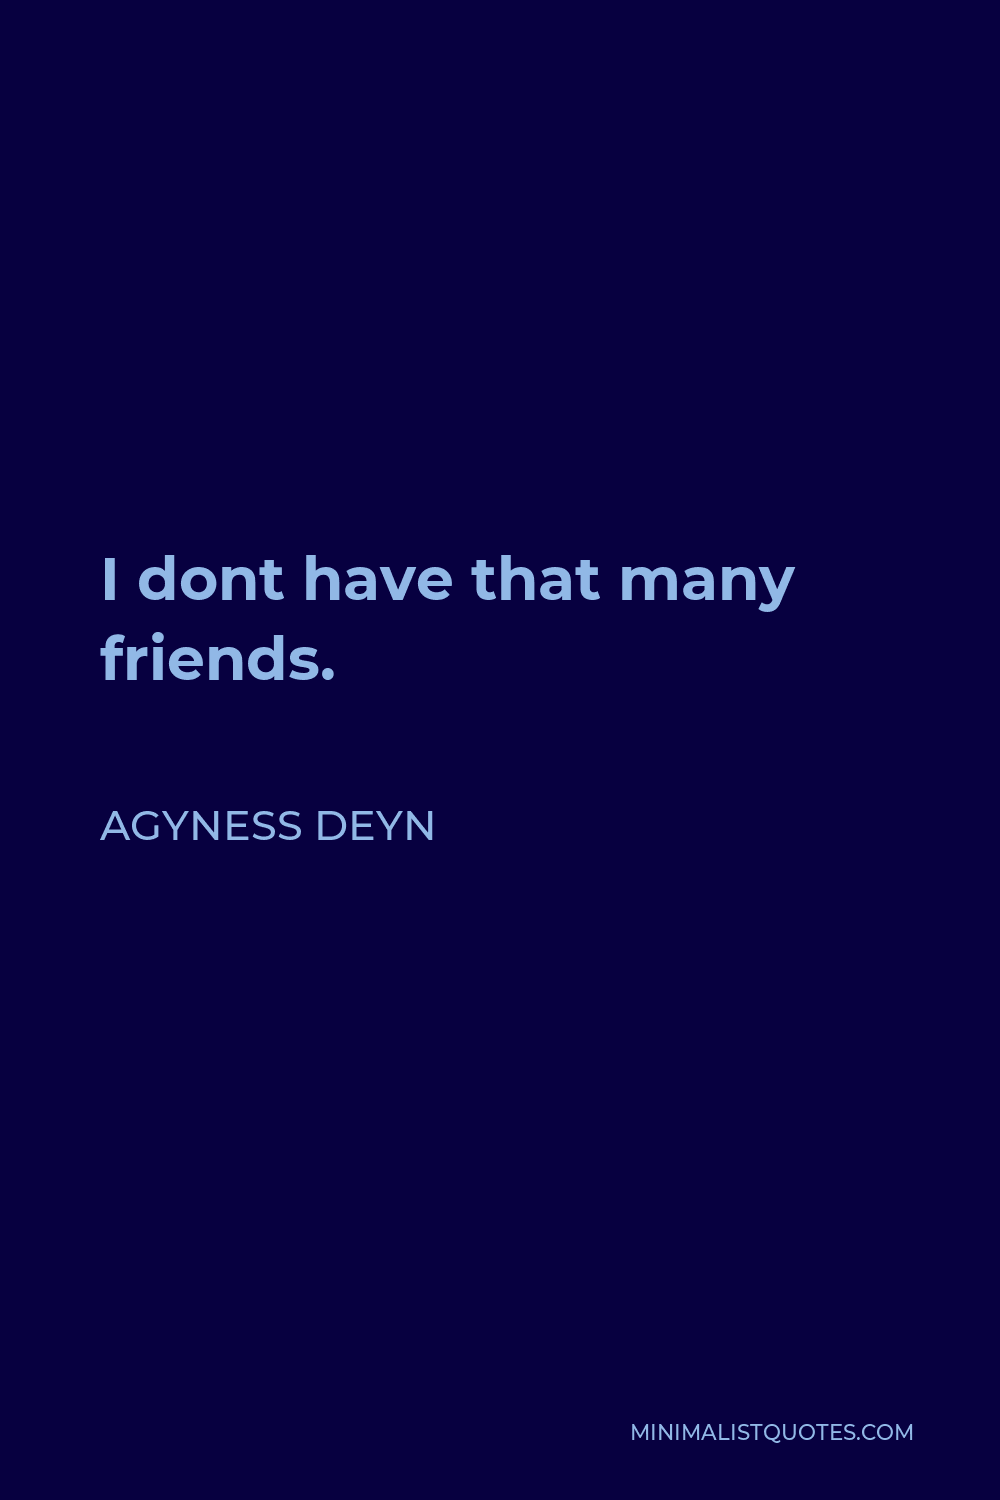 Agyness Deyn Quote - I dont have that many friends.